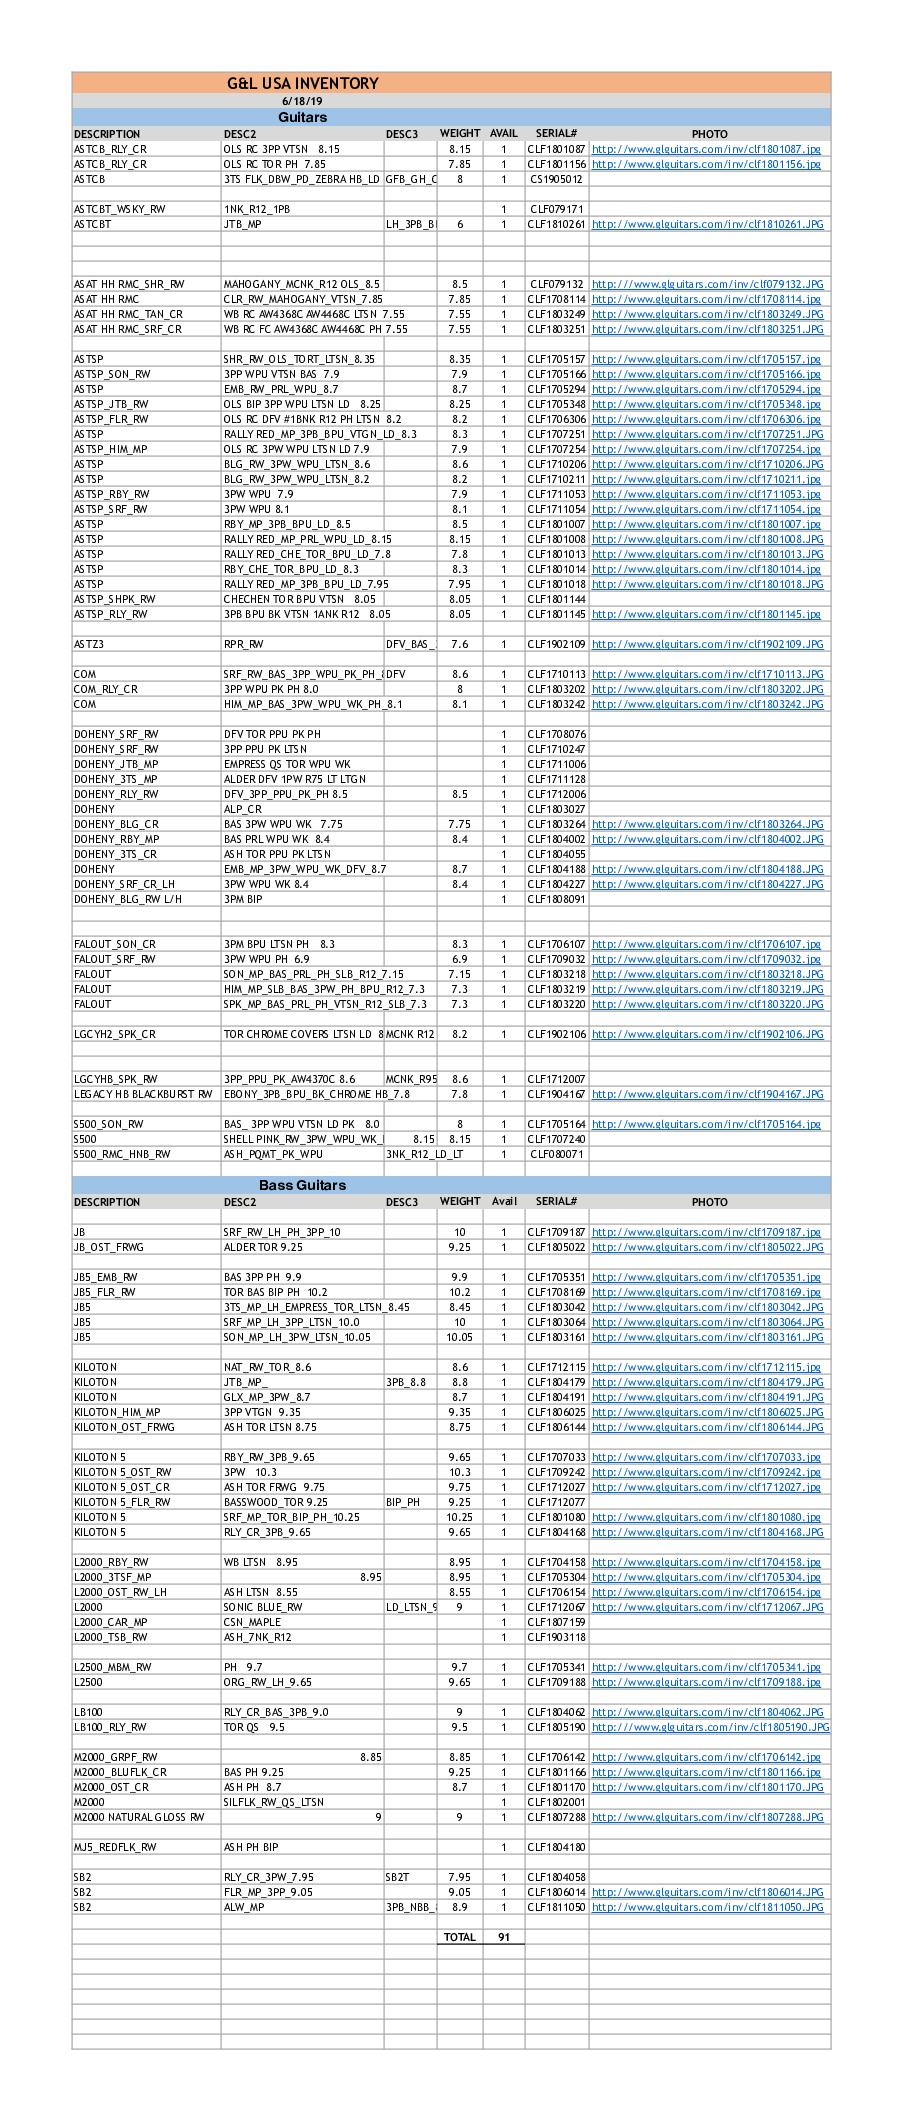 G&L Inventory-06/18/2019 (PDF) - with Option Codes